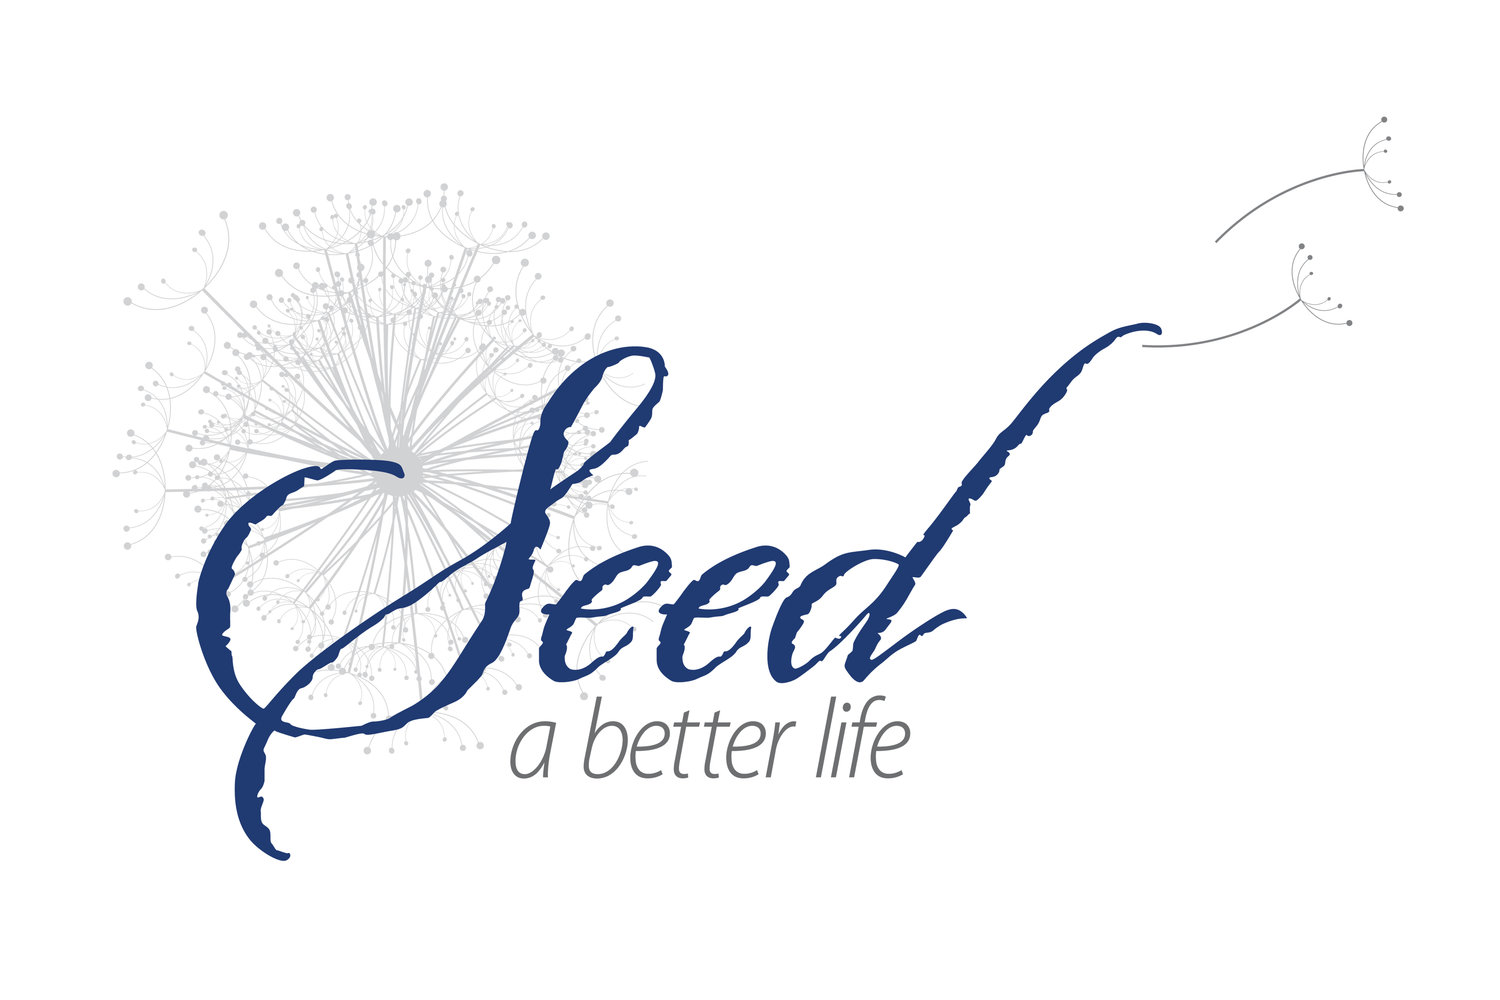 SEED A Better Life